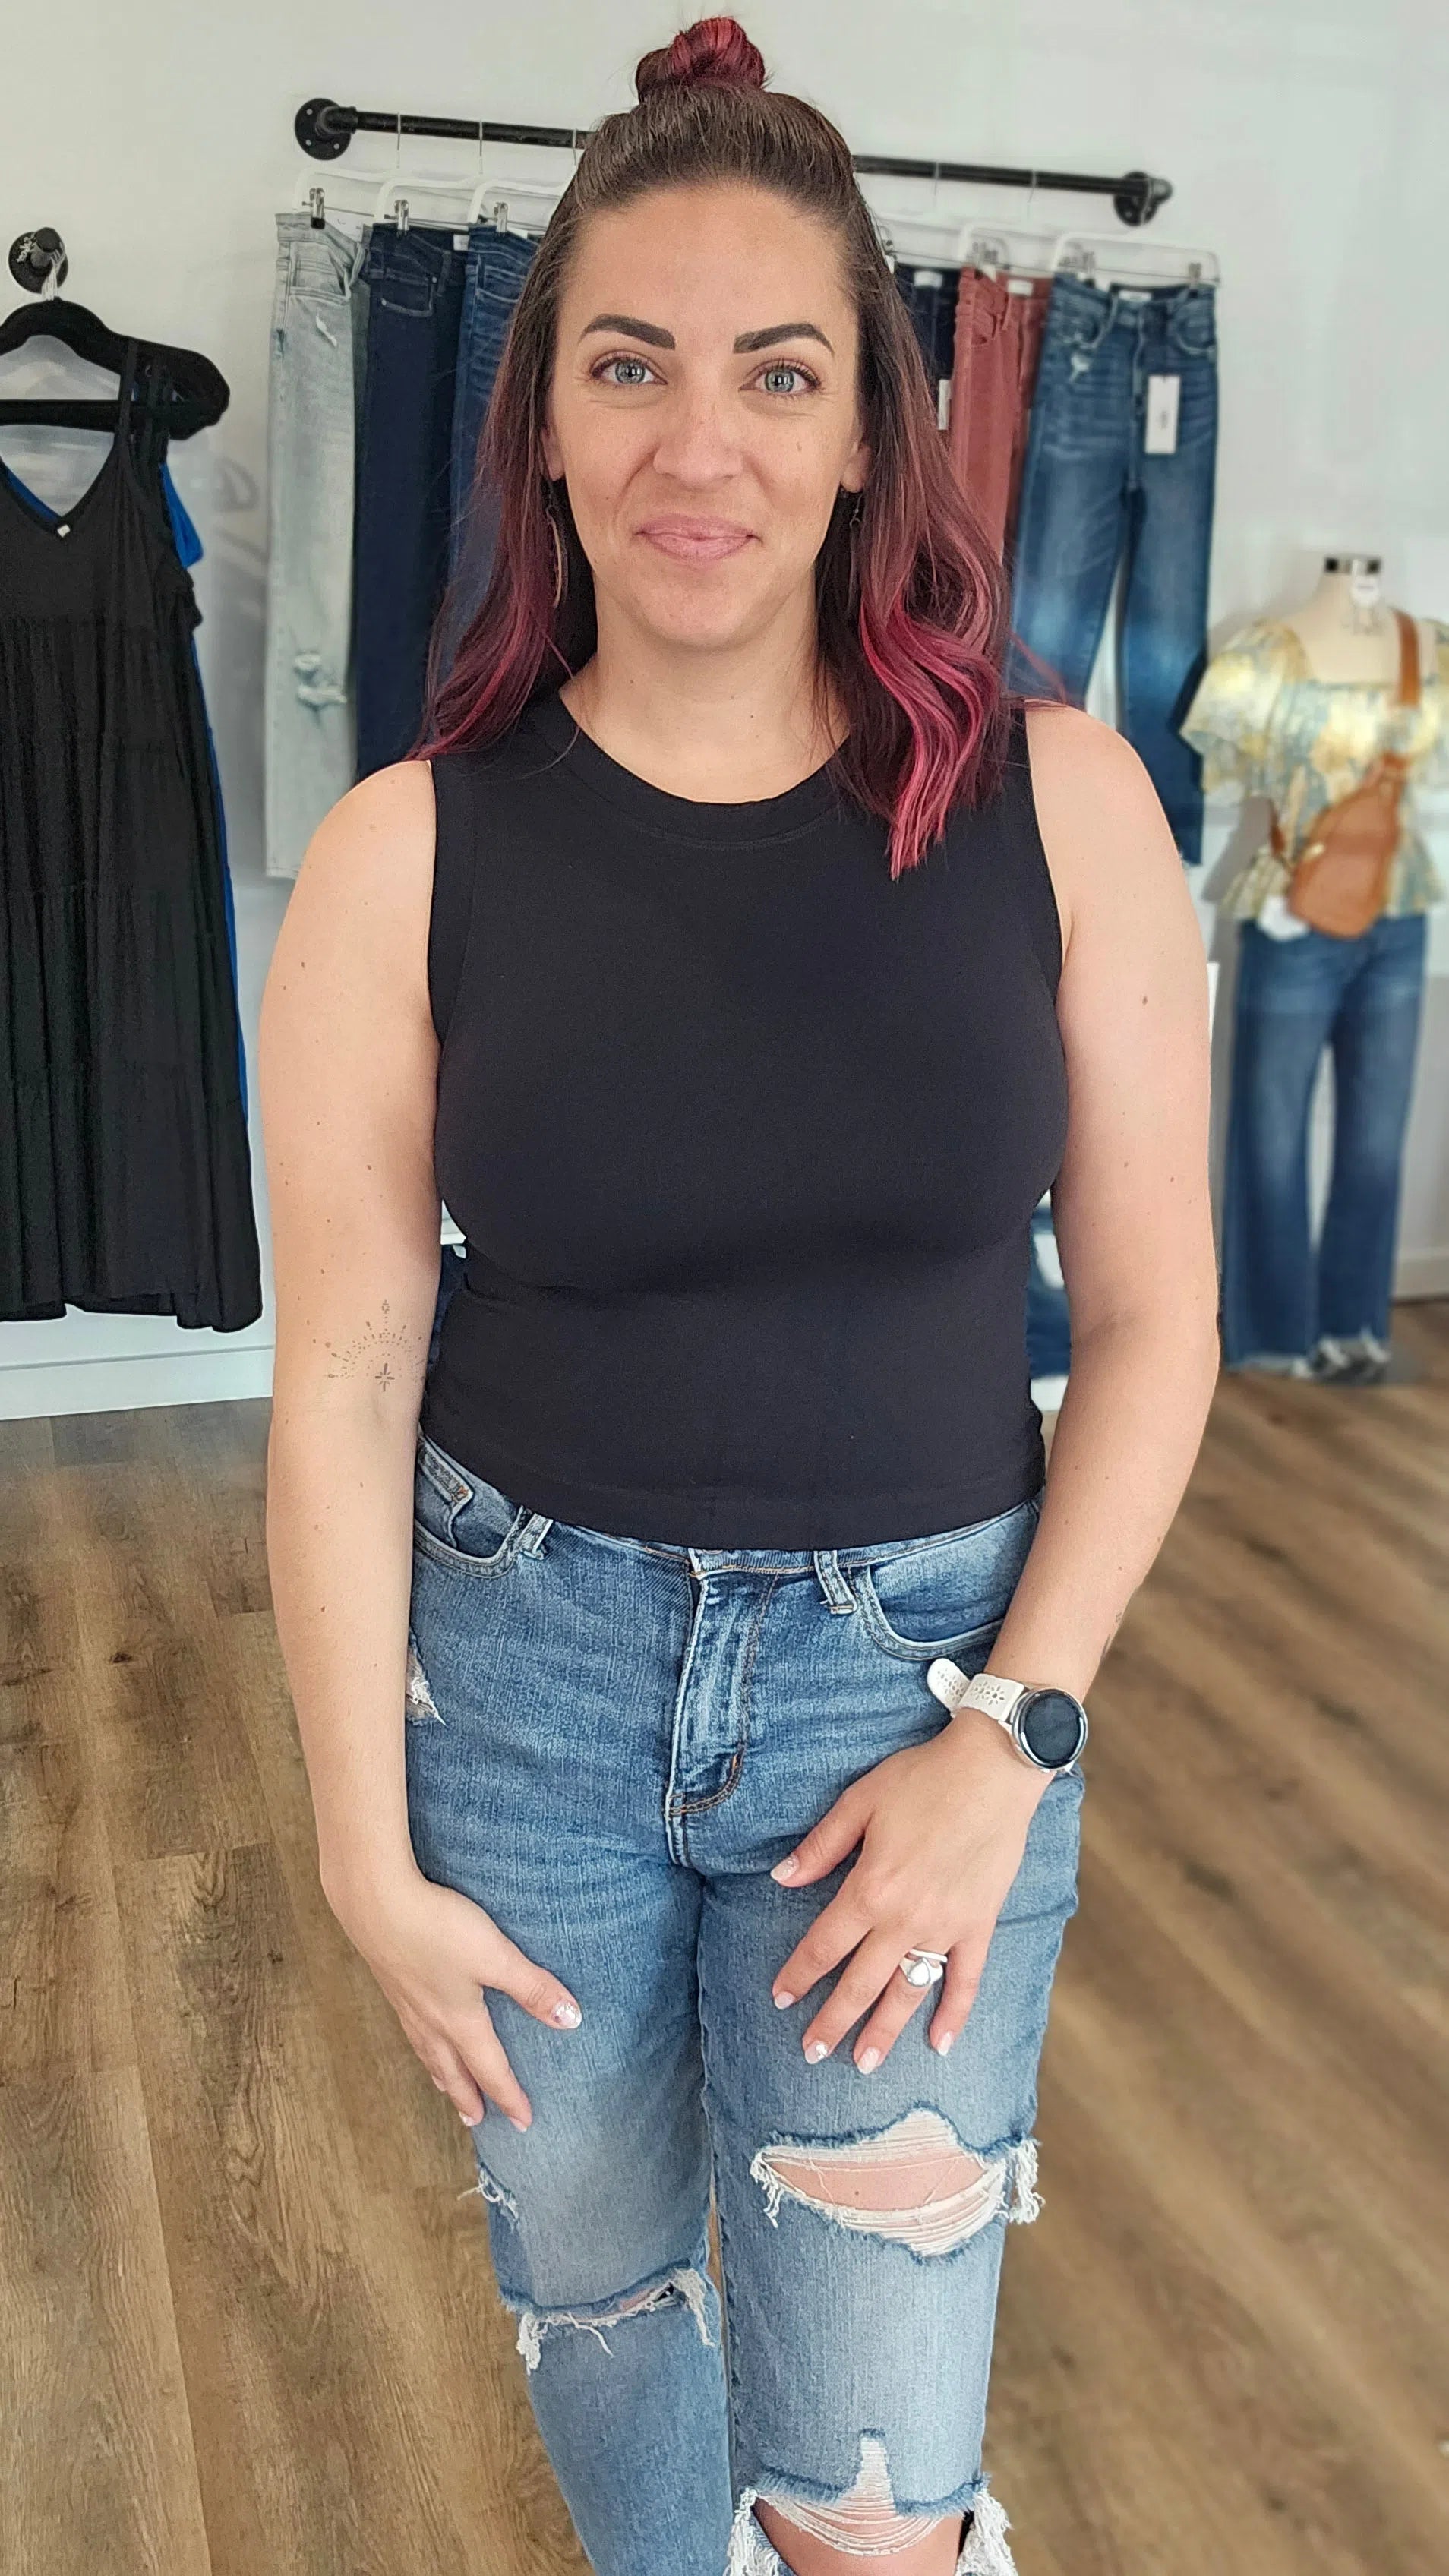 Shop Seamless Crop Tank Top-Shirts & Tops at Ruby Joy Boutique, a Women's Clothing Store in Pickerington, Ohio